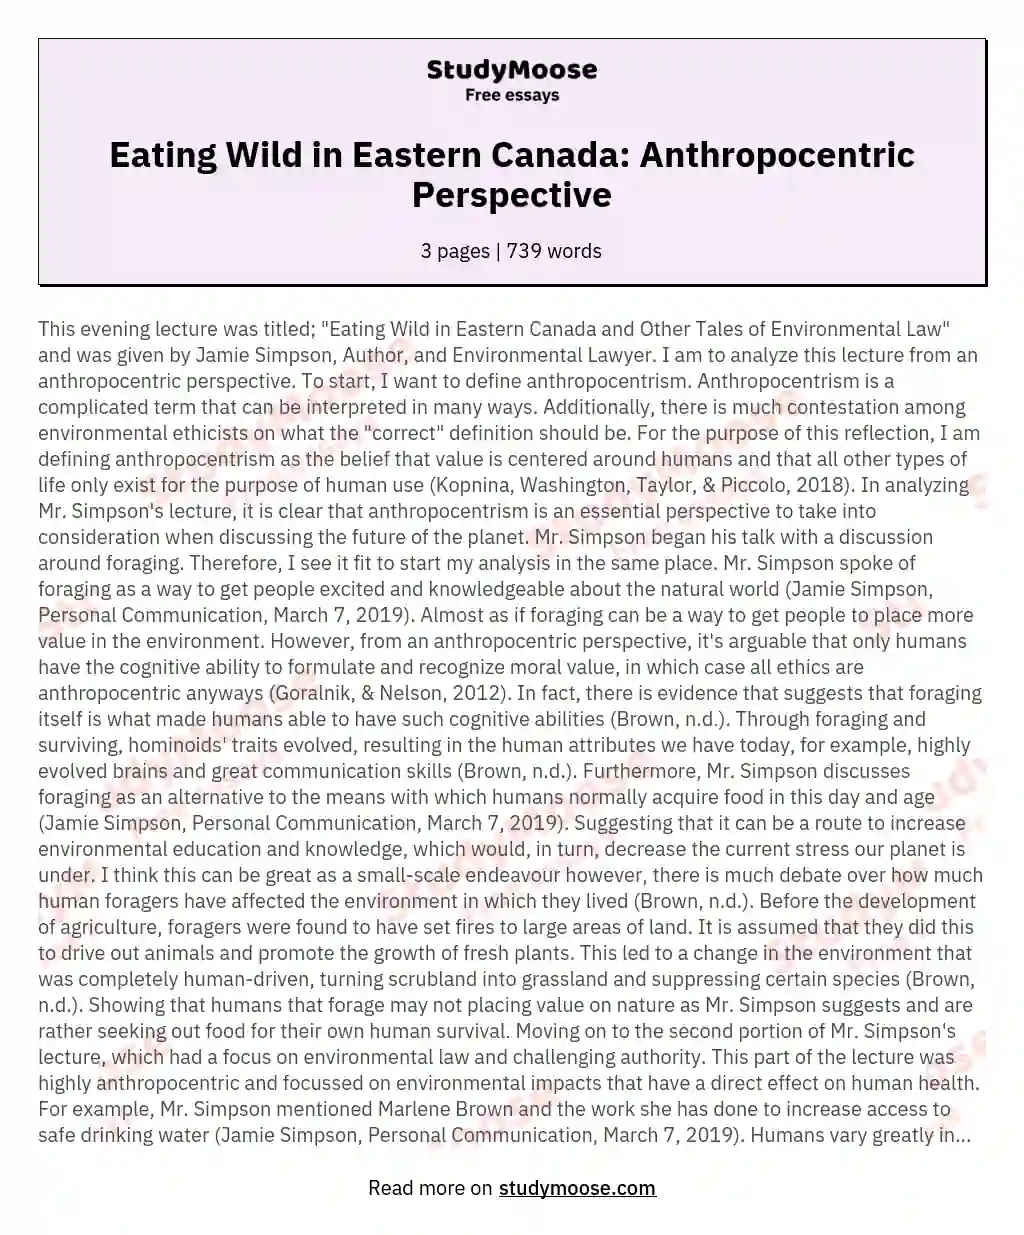 Eating Wild in Eastern Canada: Anthropocentric Perspective essay